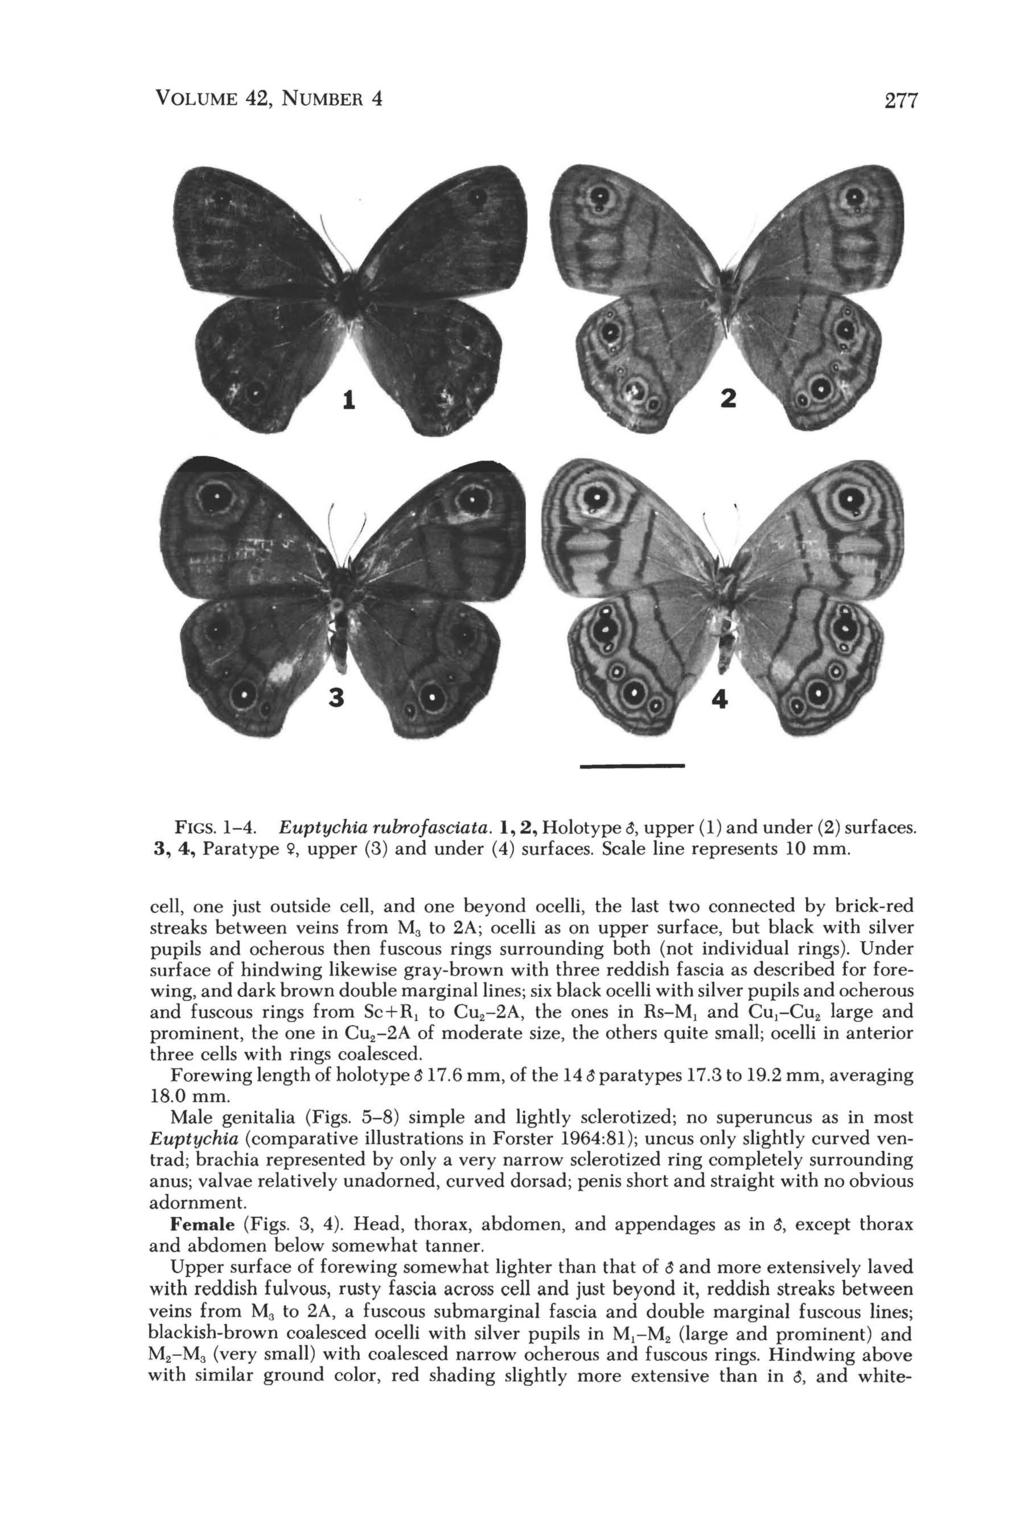 VOLUME 42, NUMBER 4 277 FIGS. 1-4. Euptychia rubrofasciata. 1,2, Holotype 5, upper (1) and under (2) surfaces. 3, 4, Para type 'i', upper (3) and under (4) surfaces. Scale line represents 10 mm.